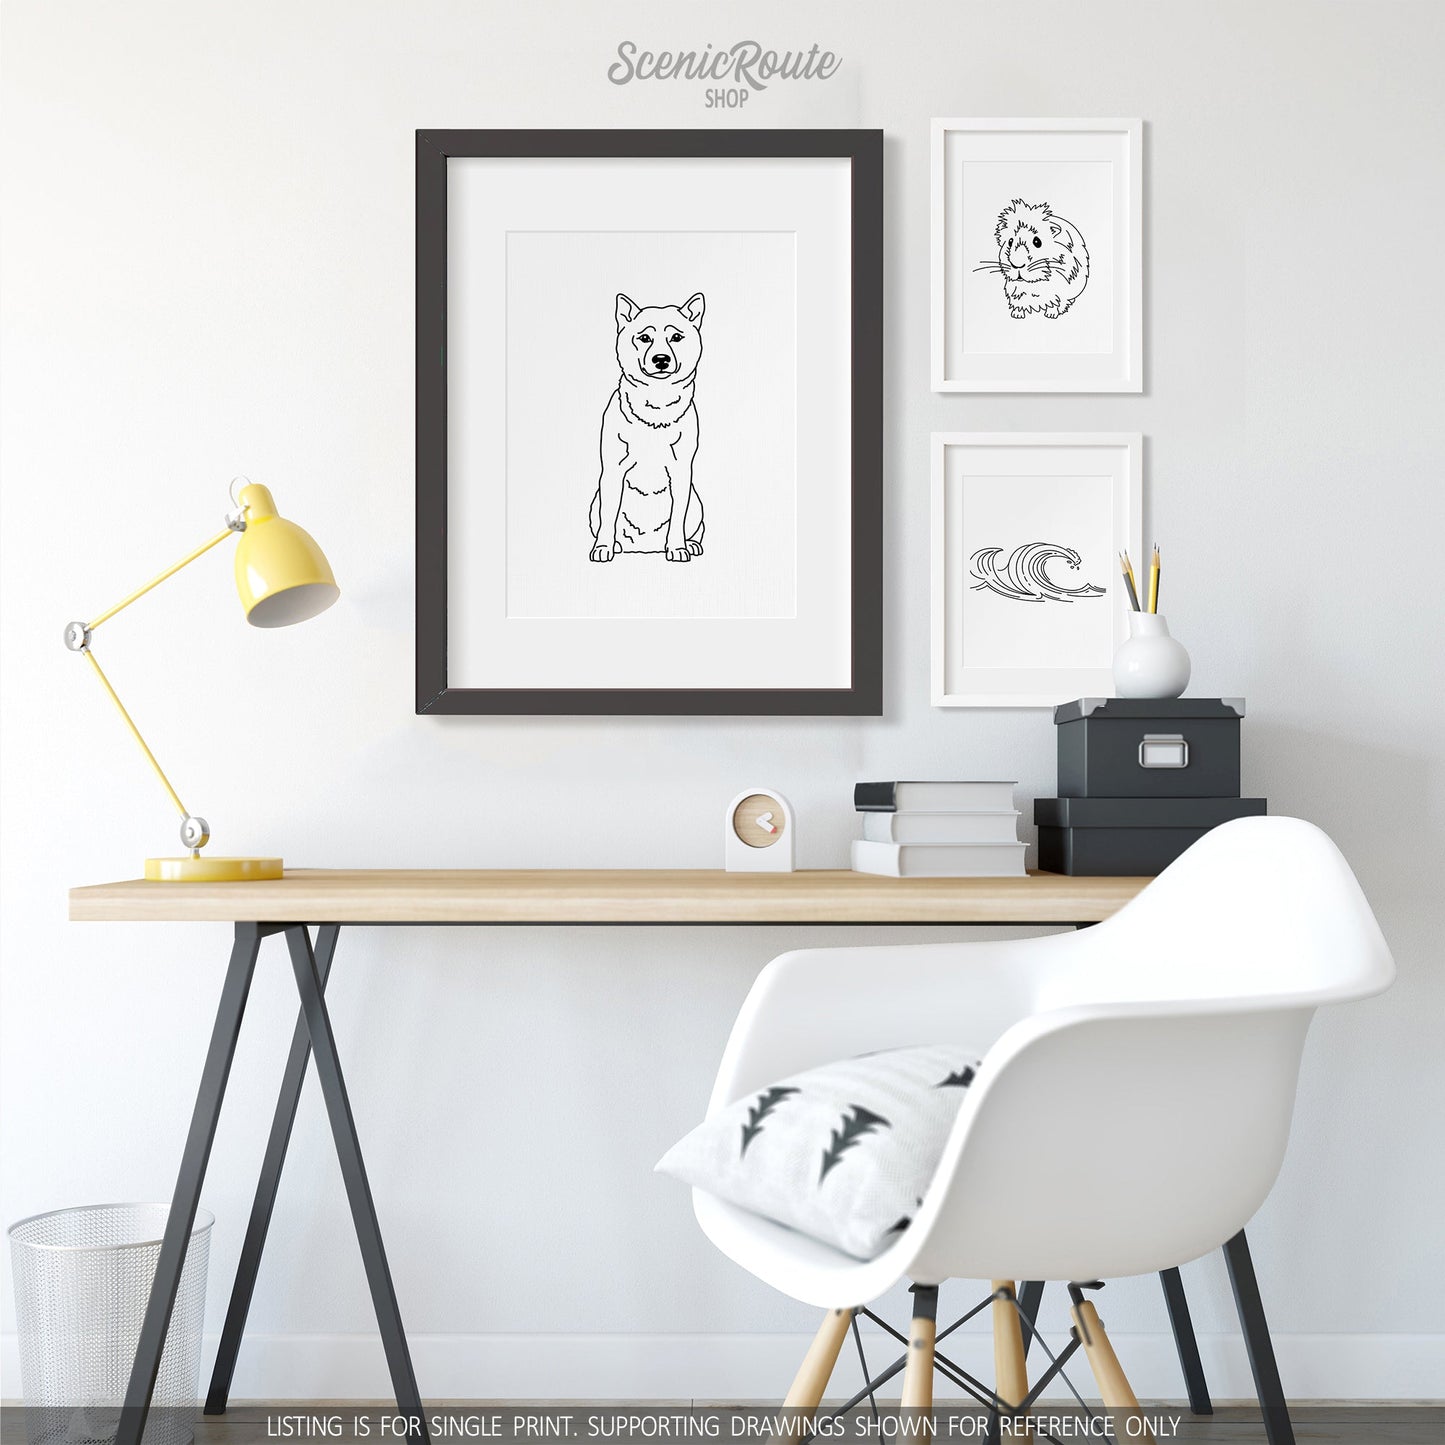 A group of three framed drawings on a white wall above a desk. The line art drawings include a Shiba Inu dog, a Guinea Pig, and Waves